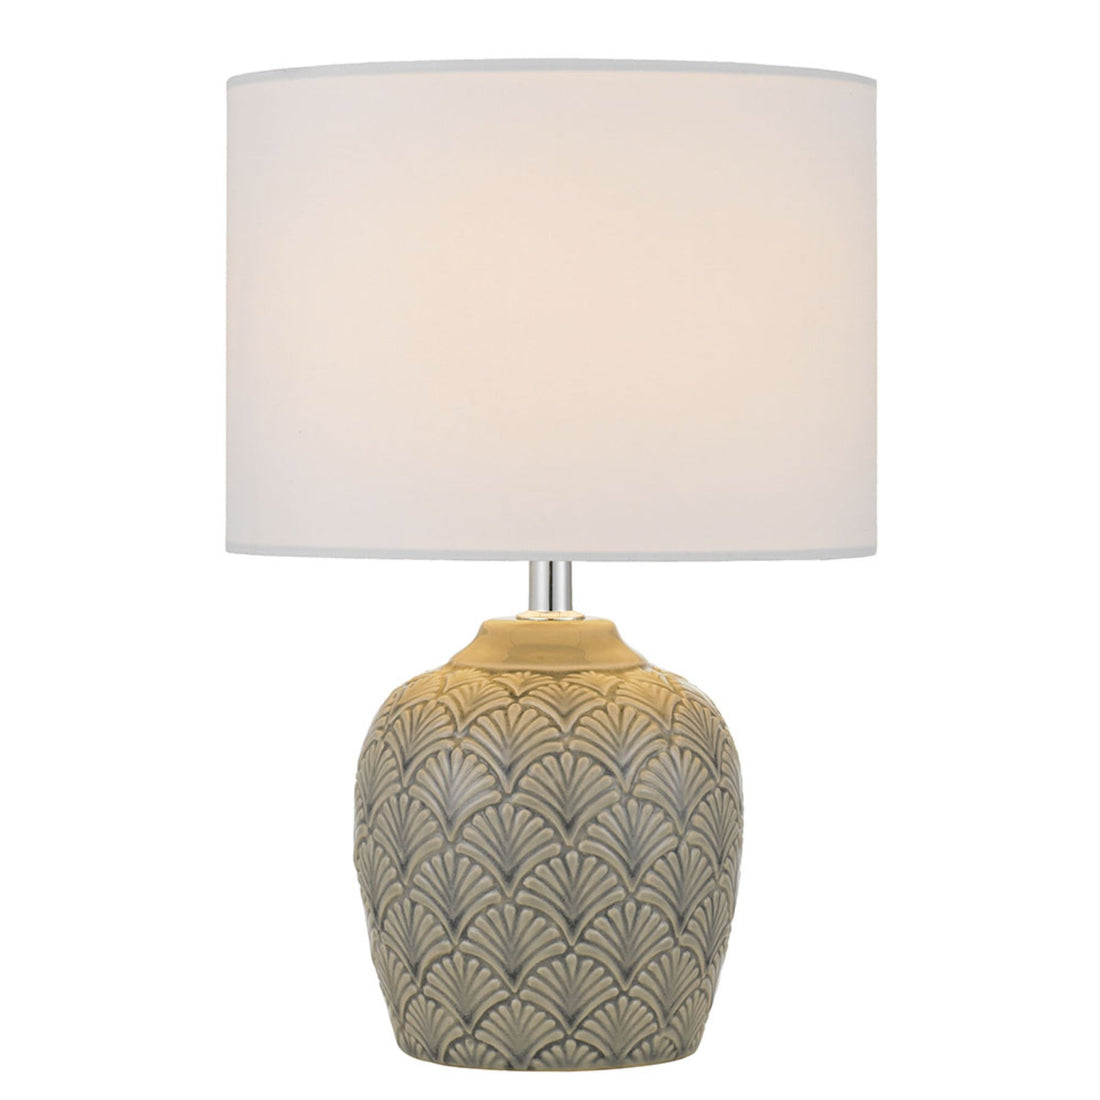 Indo Grey and White Ceramic Table Lamp